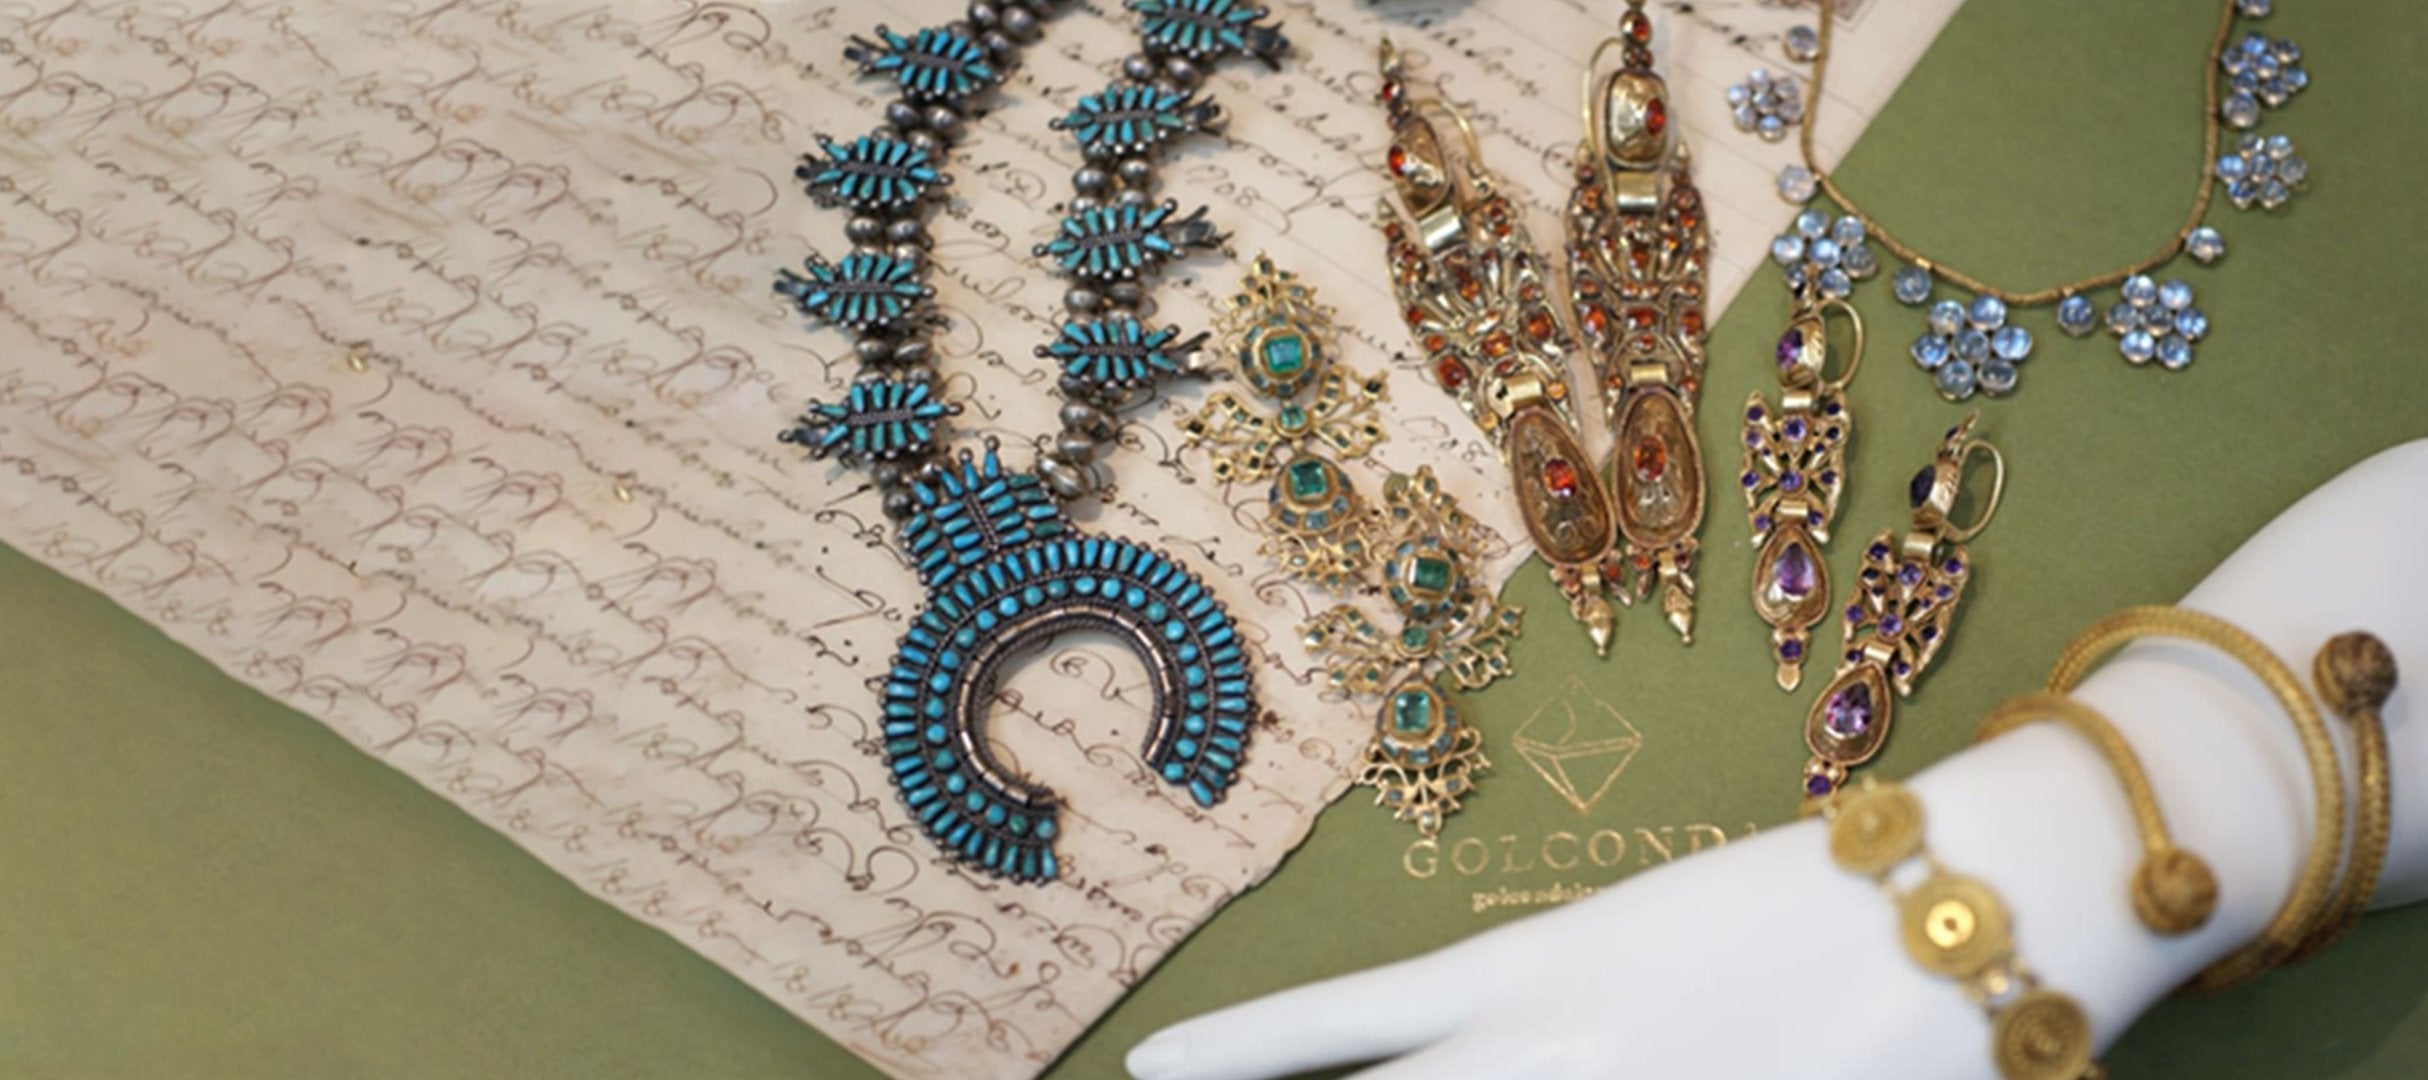 ANTIQUE, VINTAGE & SIGNED JEWELRY